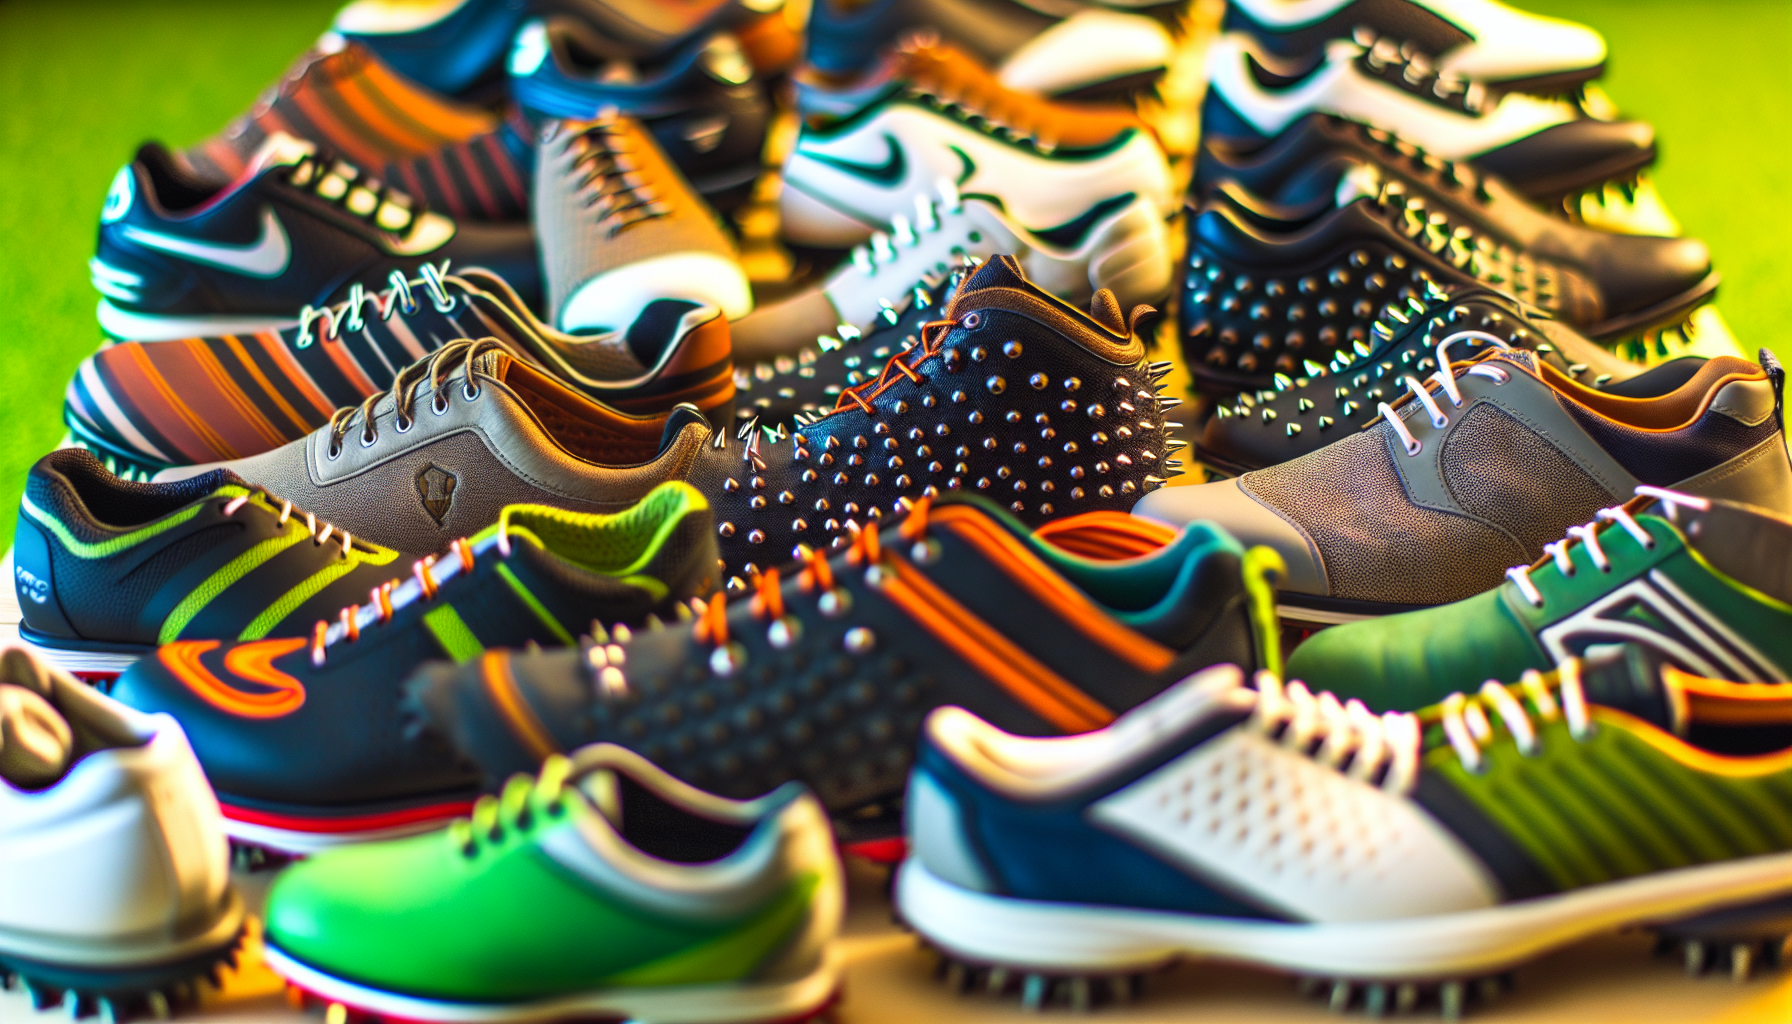 A selection of spiked golf shoes